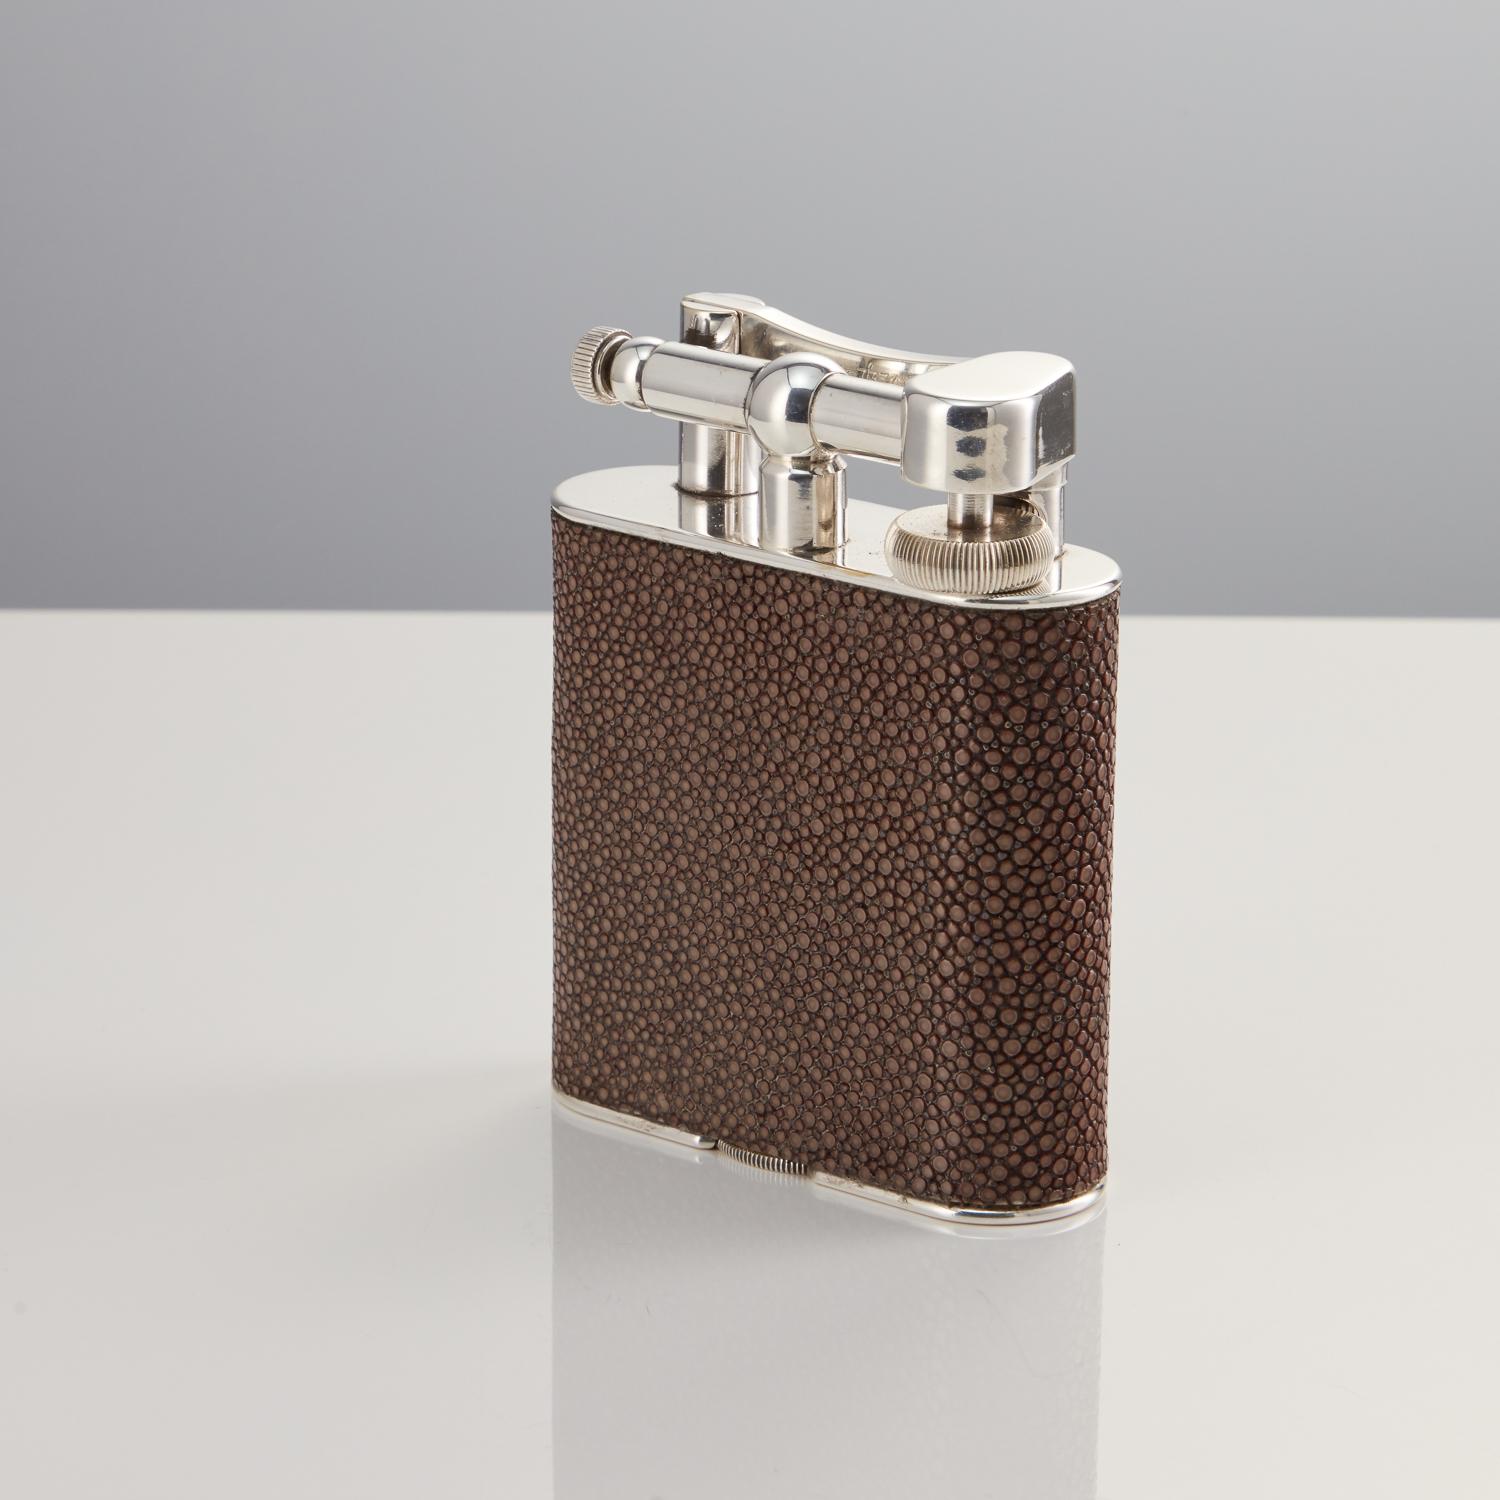 An attractive looking table lighter by Dunhill, in full working order. The beautiful muted coloured Shagreen is in perfect condition. The lighter feels great to hold and use. The piece has full patent marks and Dunhill logo, which is seen in the